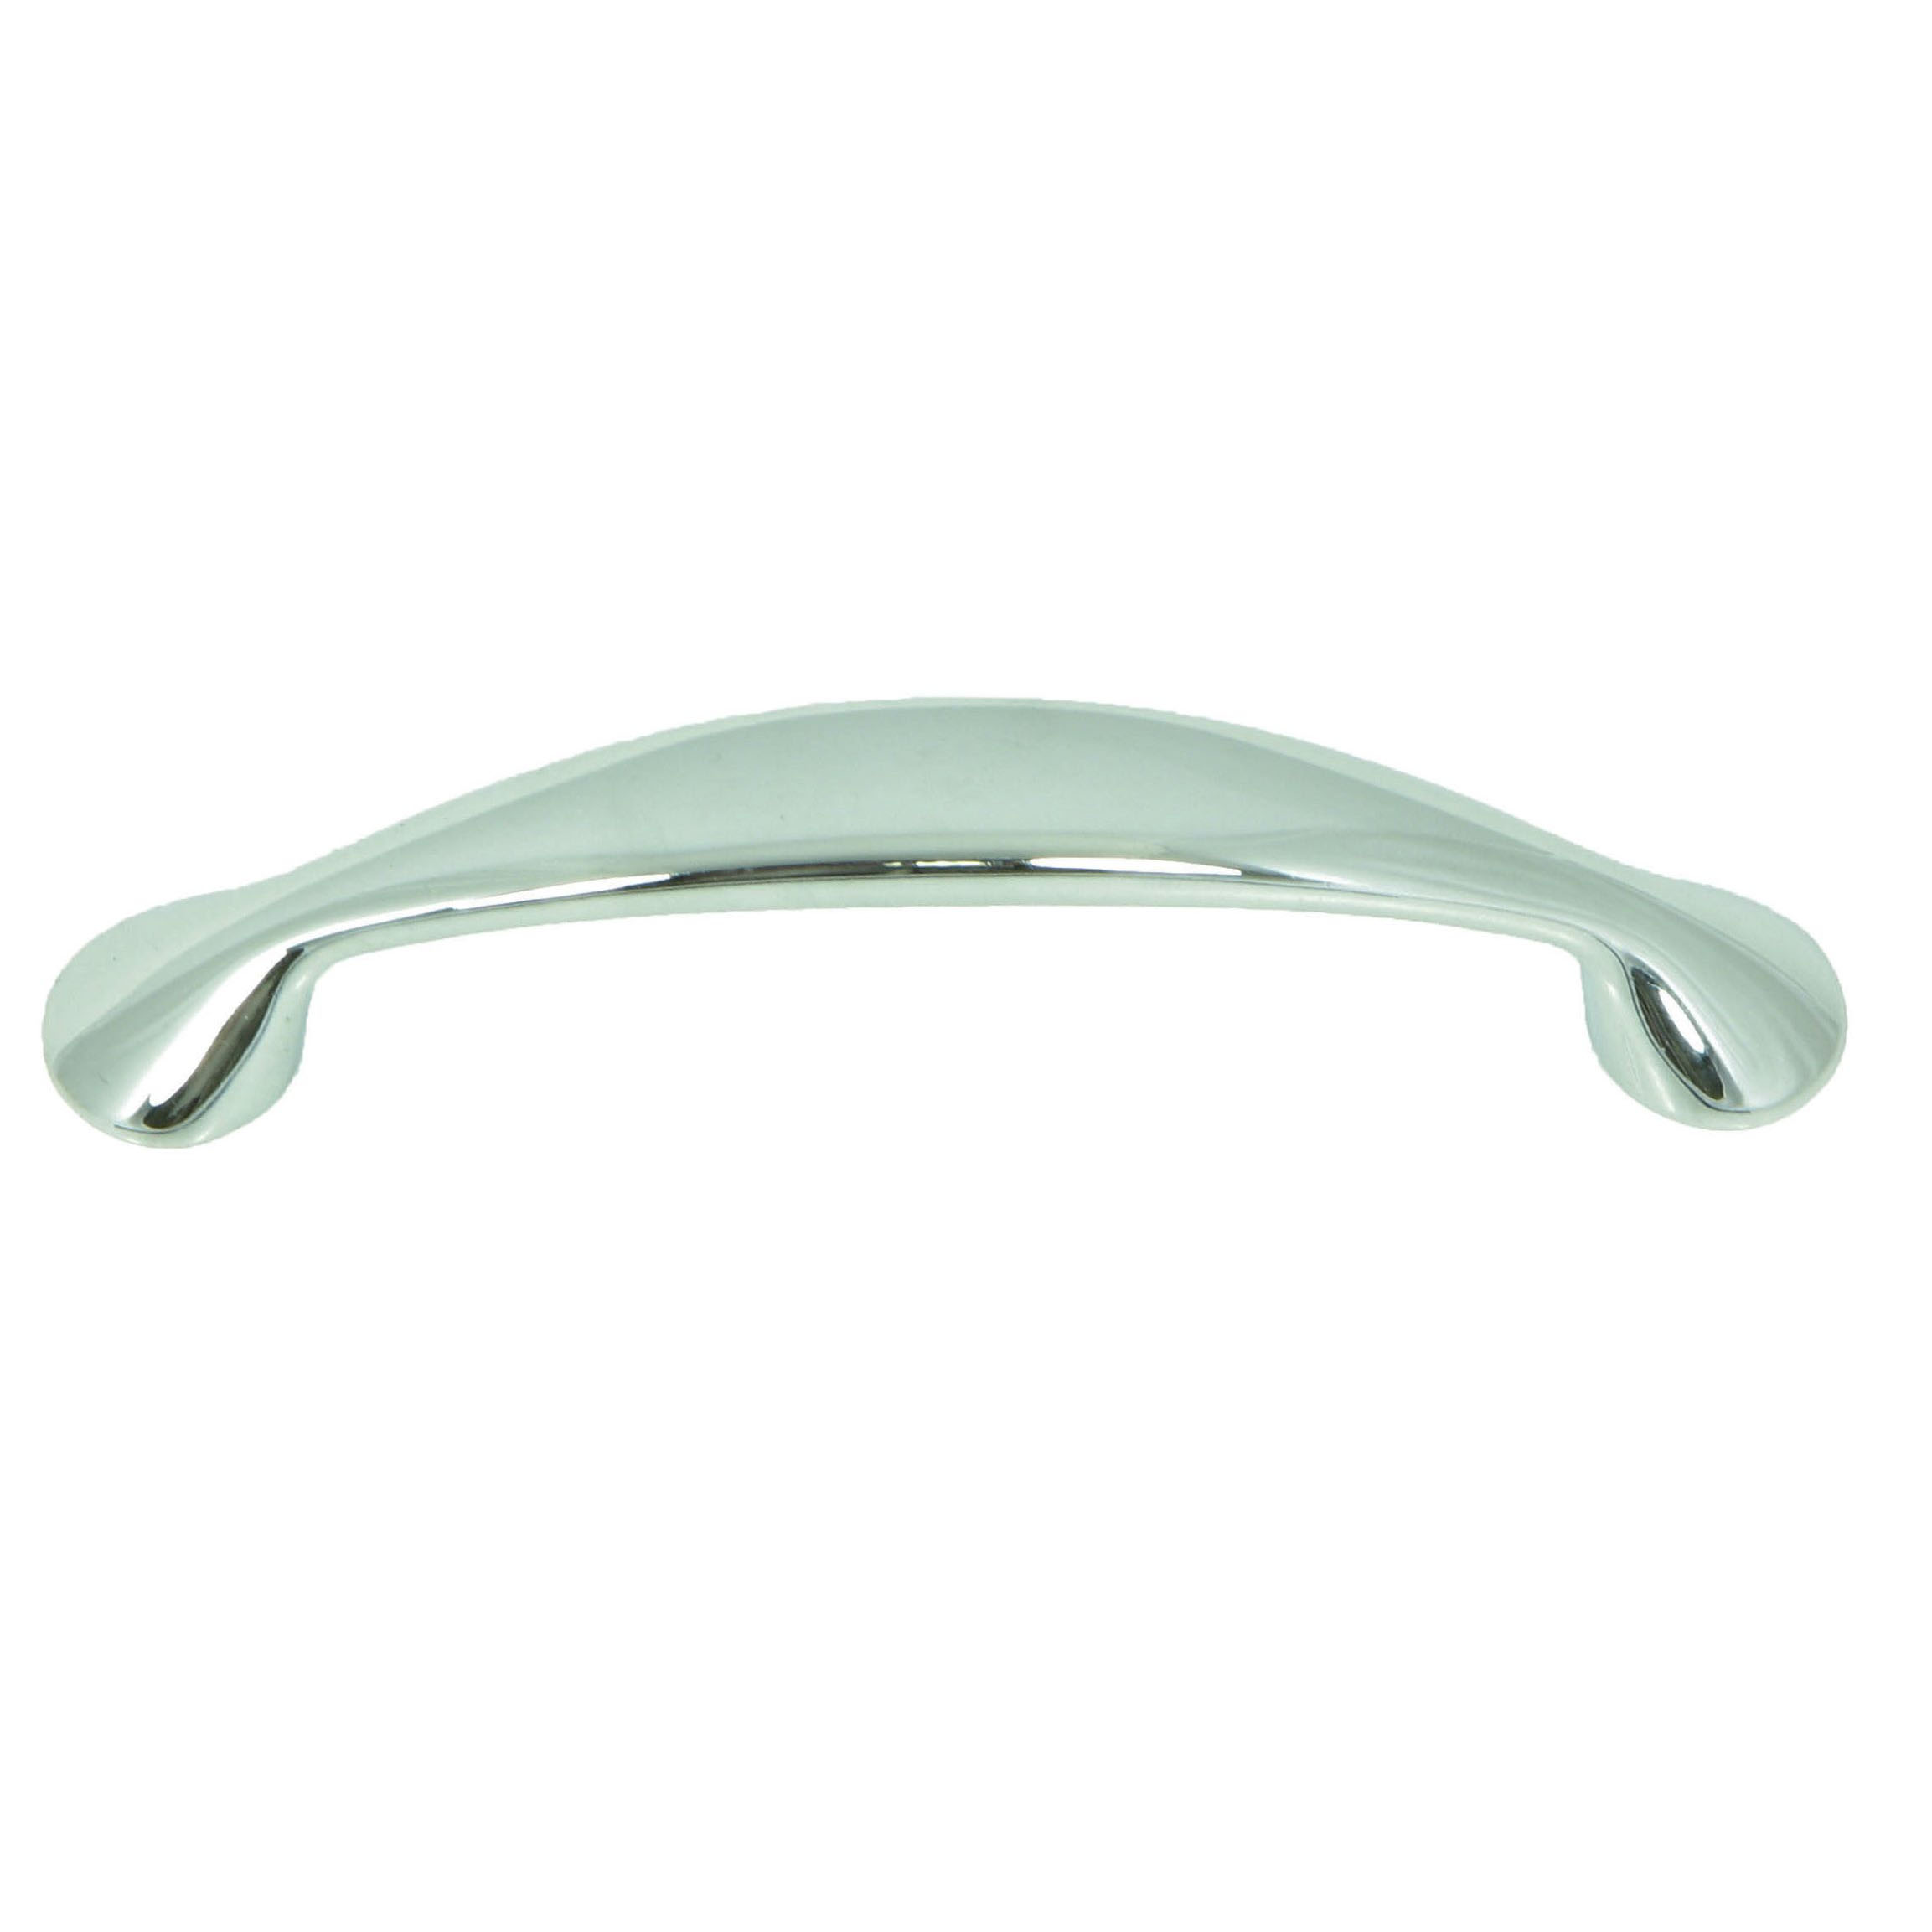 Silhouette Cabinet Pull in Polished Chrome 1 pc